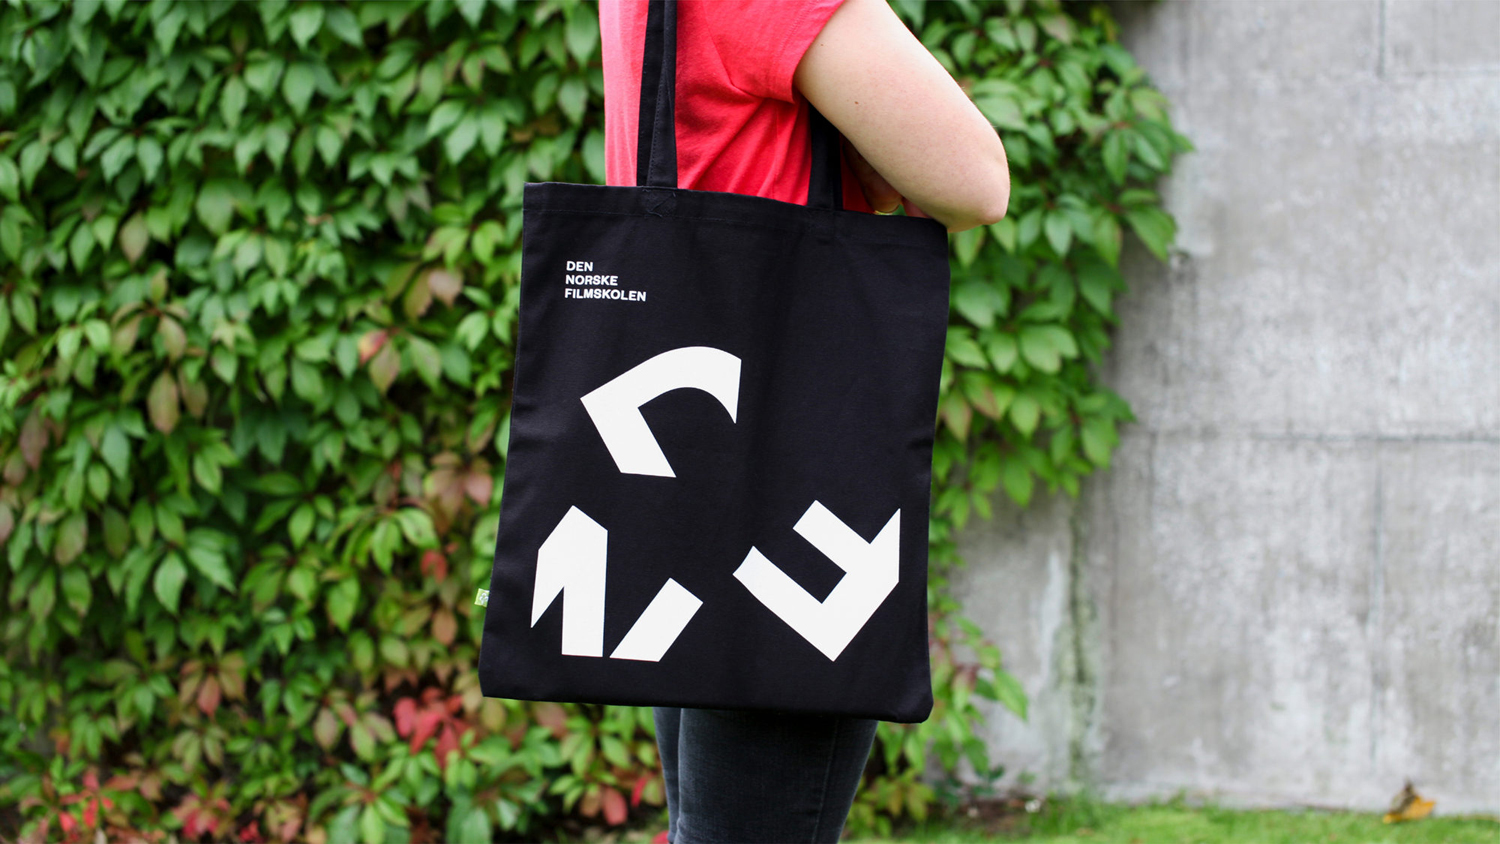 Logo, posters, banners, tote bag and website designed by Oslo-based Neue for The Norwegian Film School